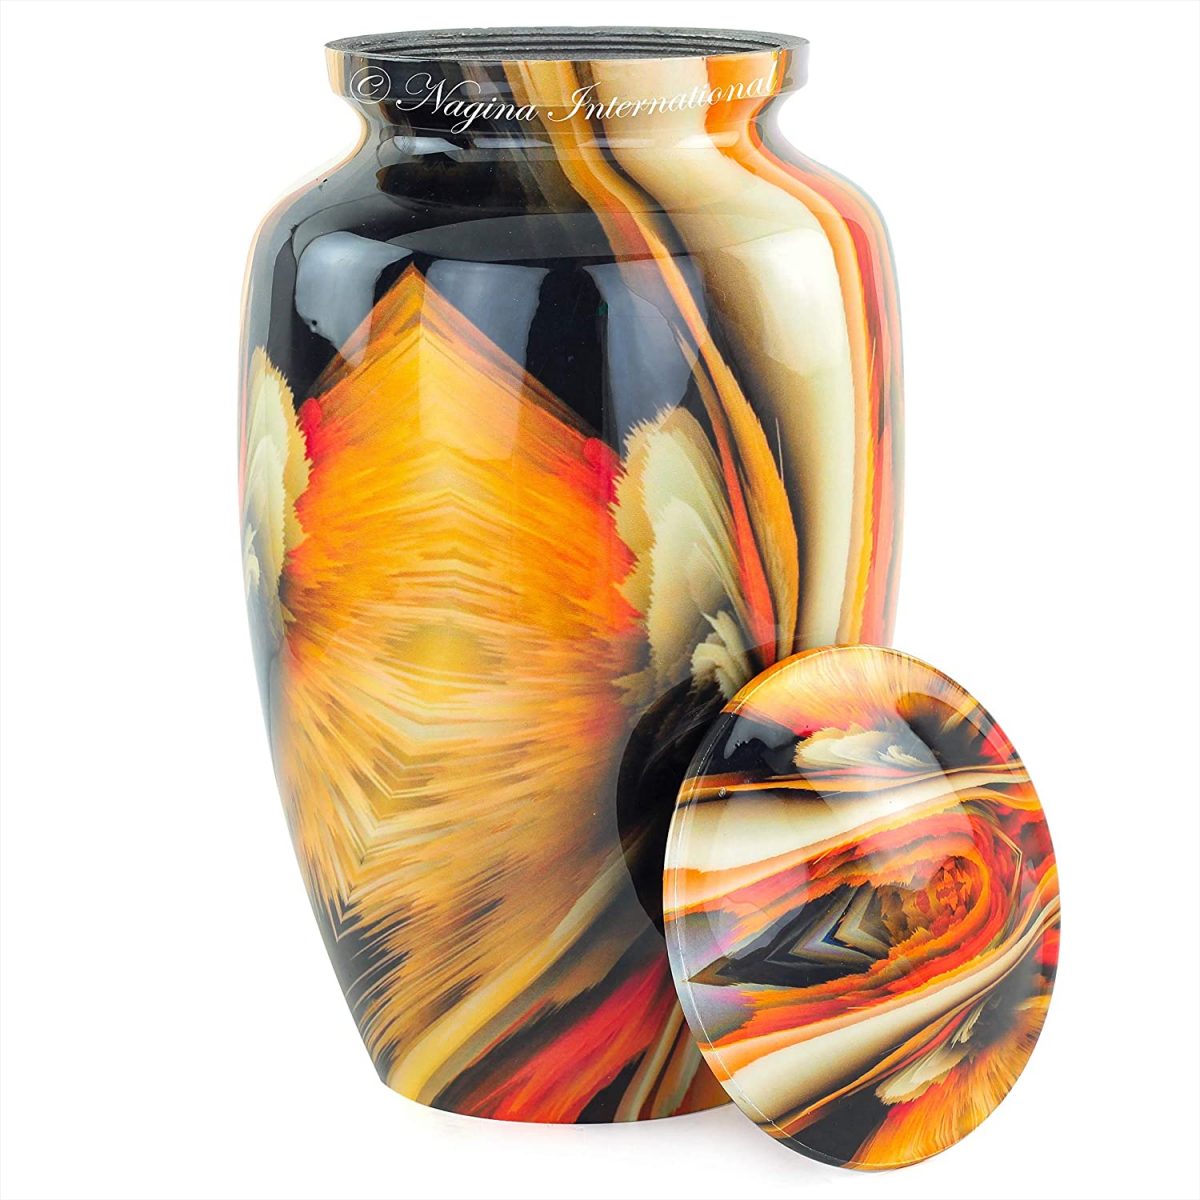 11" Aluminum Cremation Funeral Urns for Adult Human & Pet Loss | Beautiful Style Handcrafted Burial Funeral Urns for Cremated Ash Remains Storage (Orange Fire)